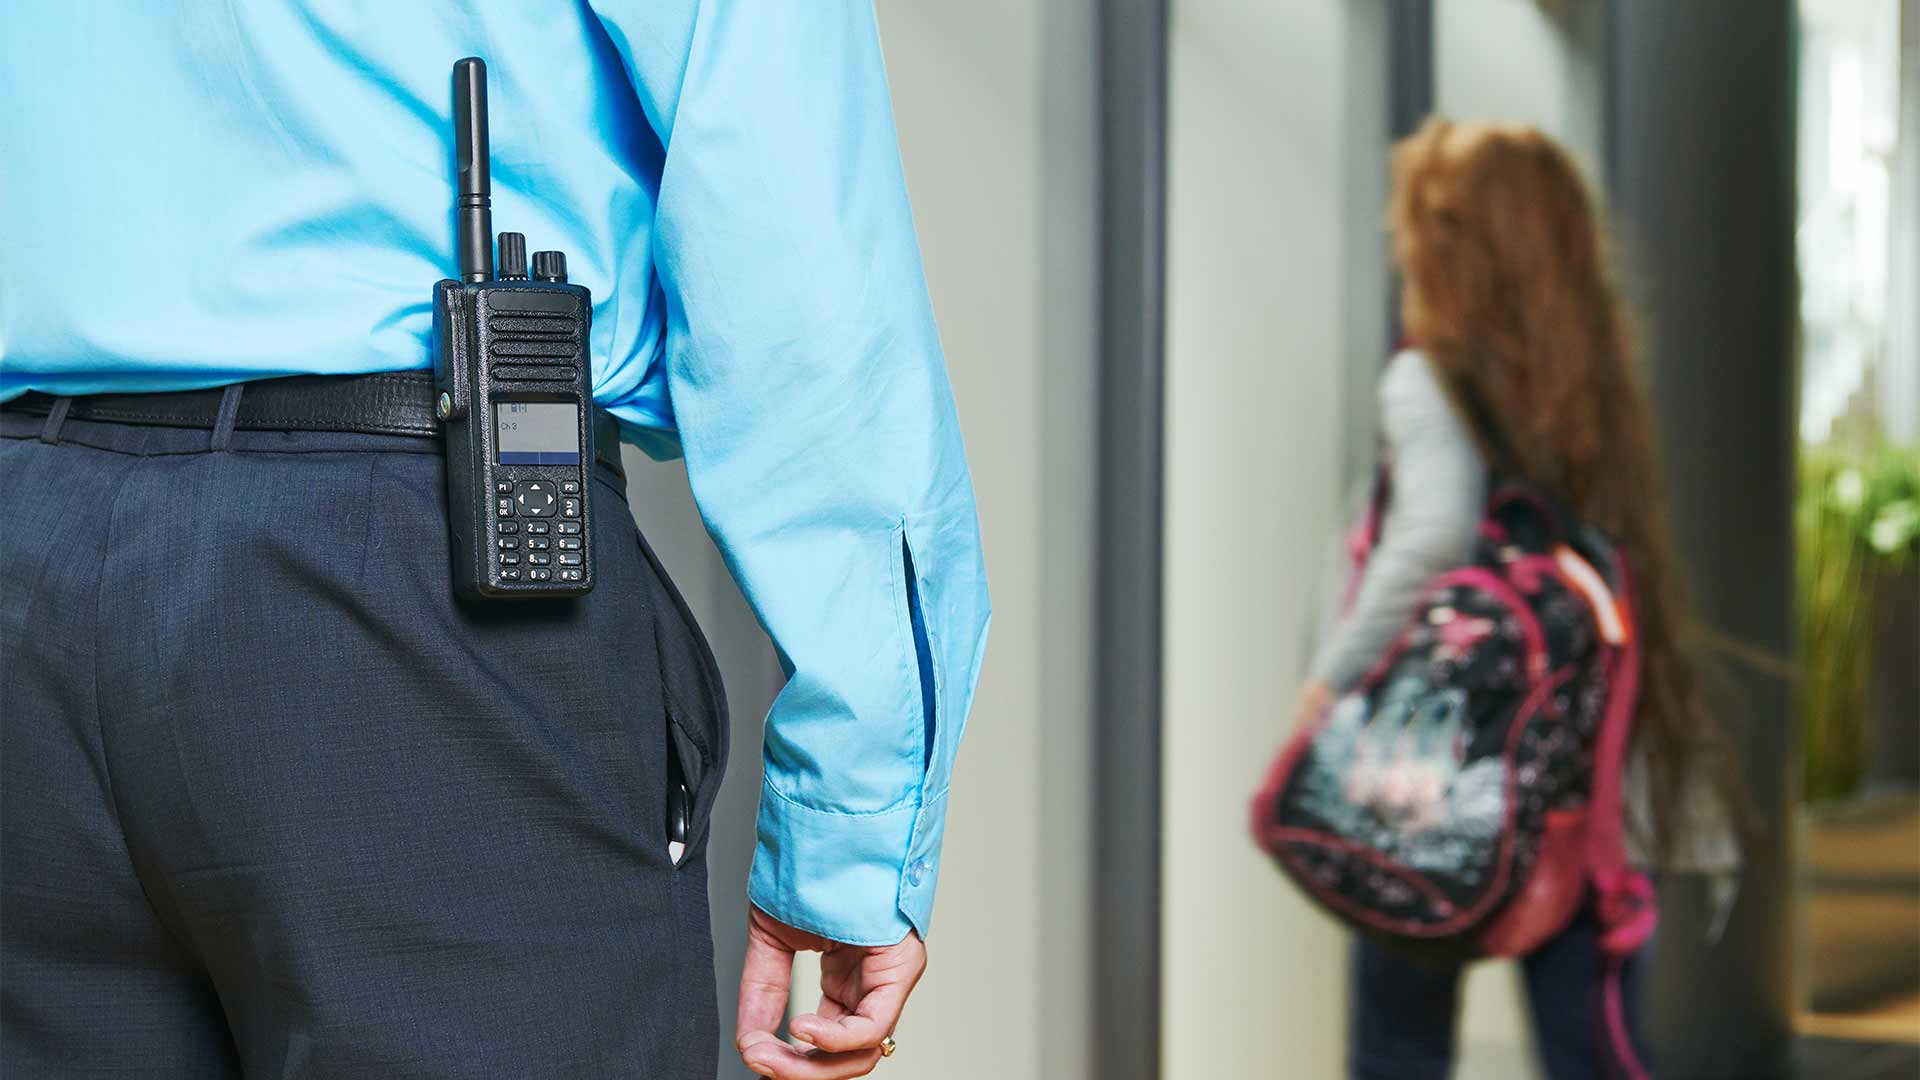 Security guard with a radio at a school in Tampa, FL.